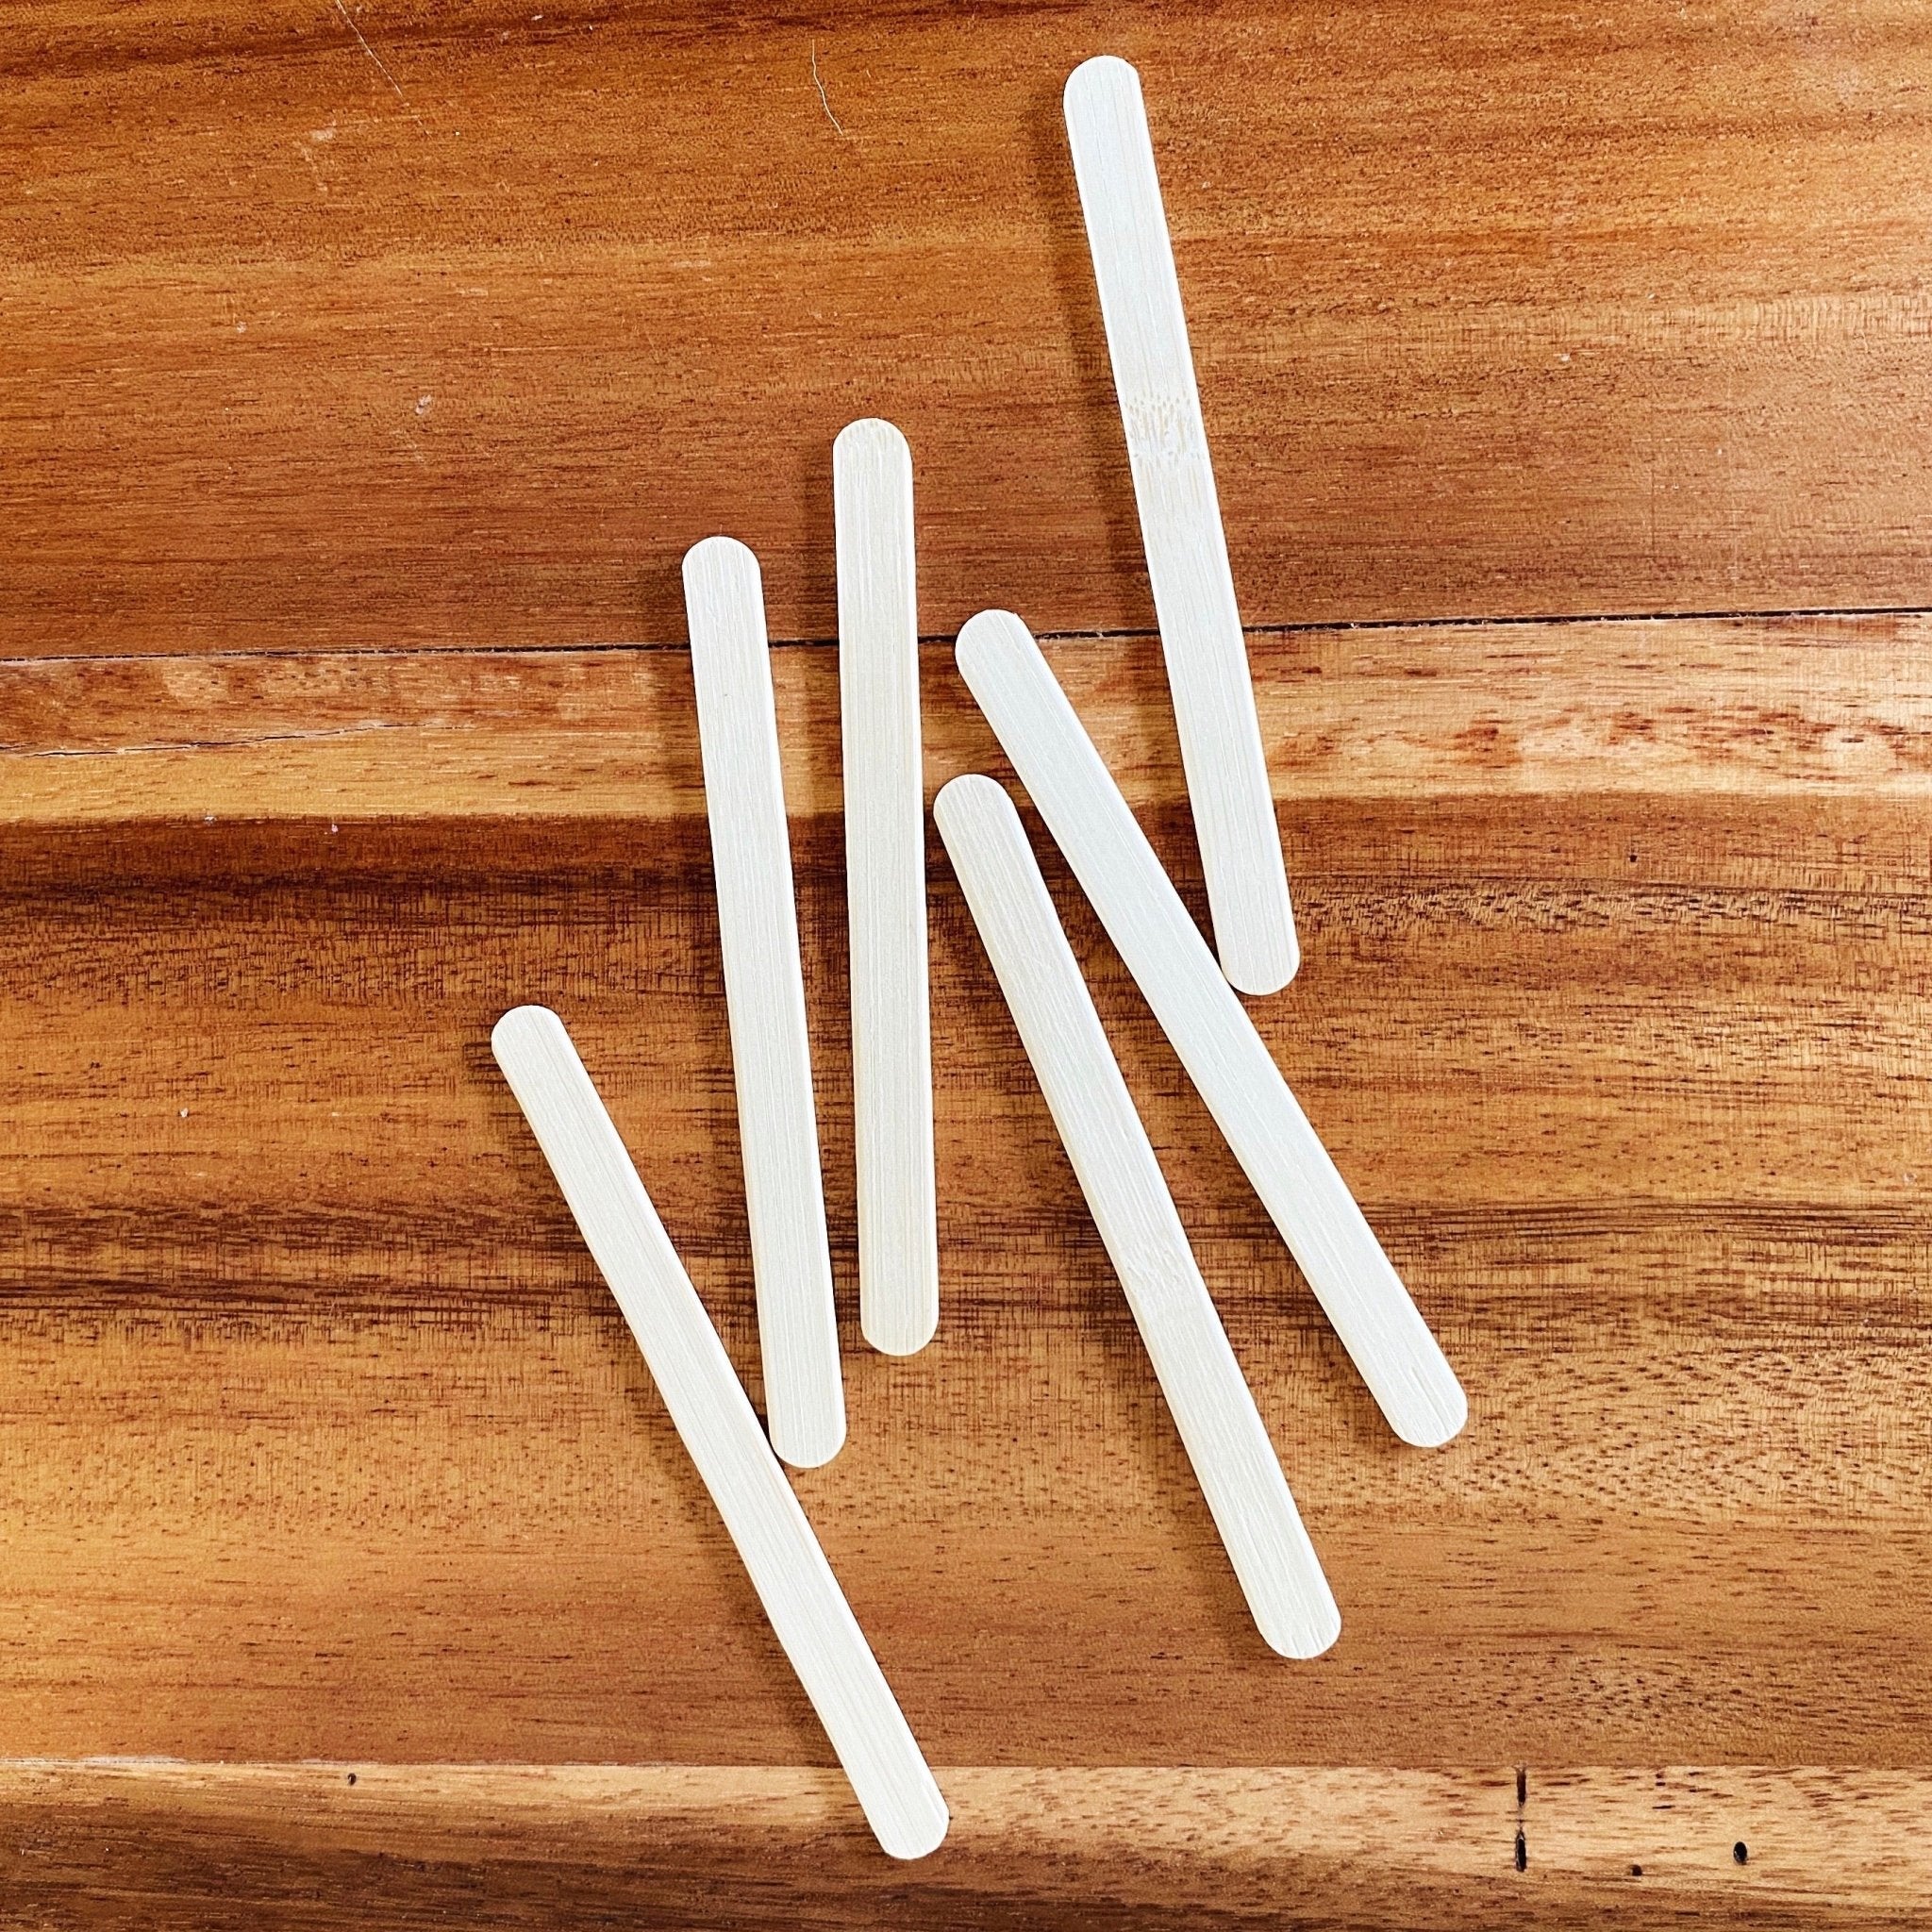 Craft Wooden Popsicle Stick Pieces for sale